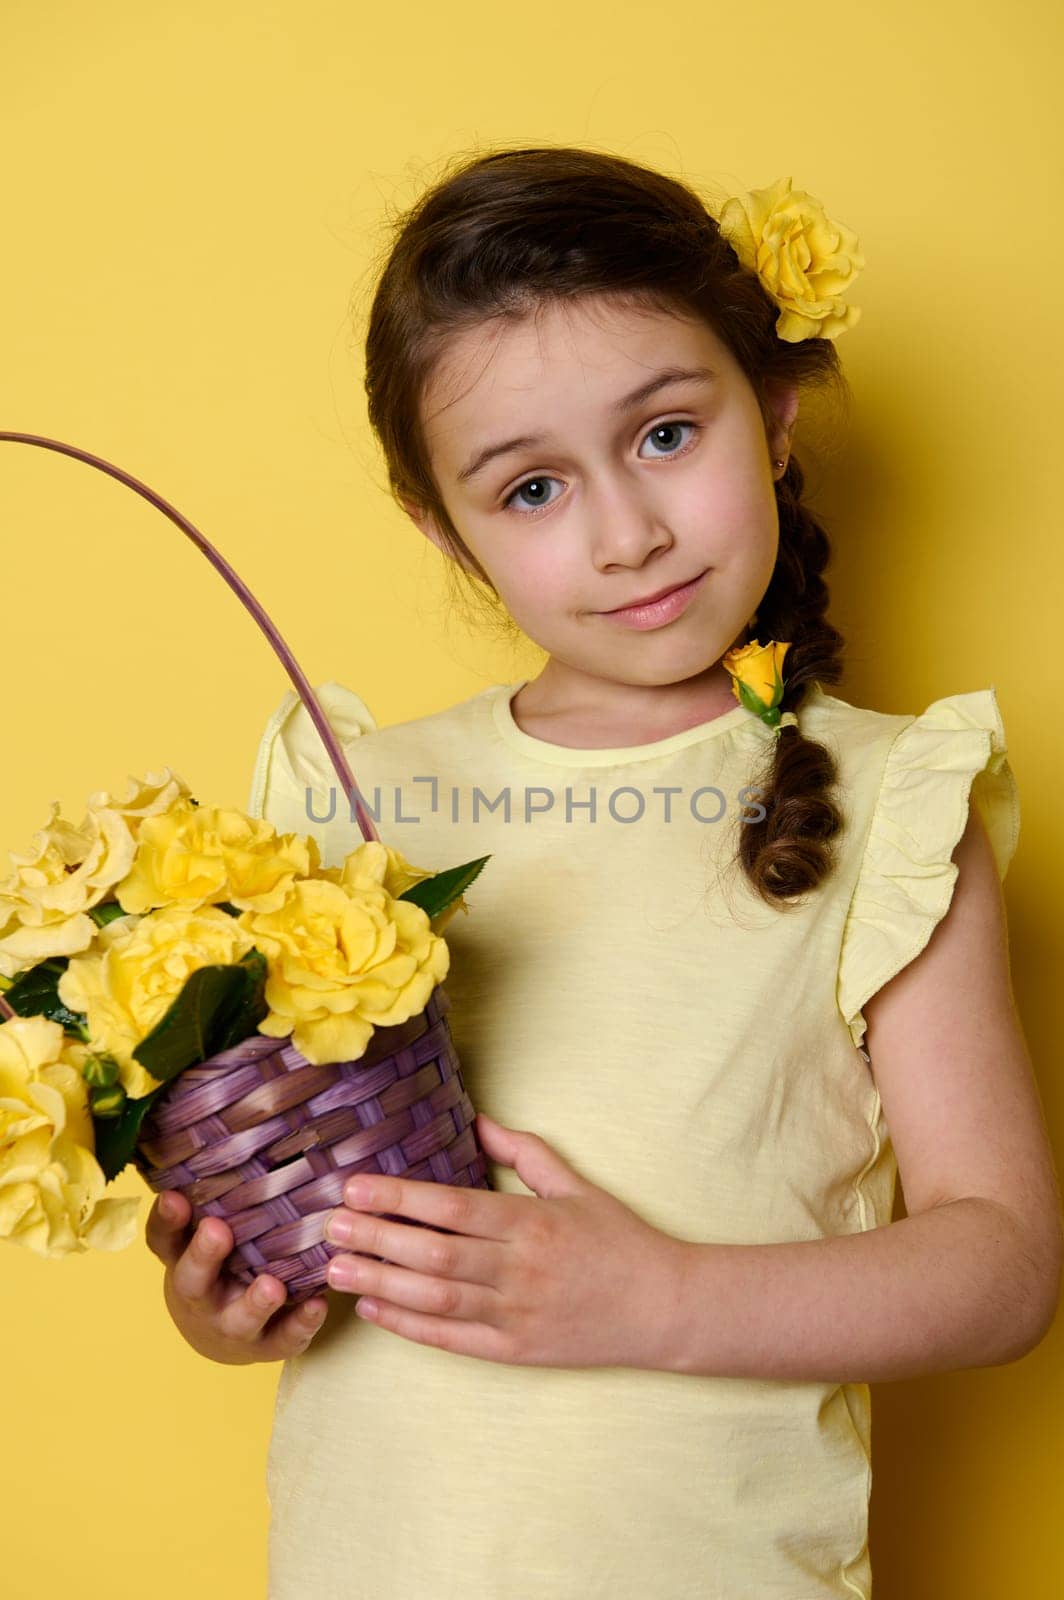 Lovely little girl with flowers in pigtail, dressed in yellow clothes, holding purple wicker basket with yellow roses by artgf